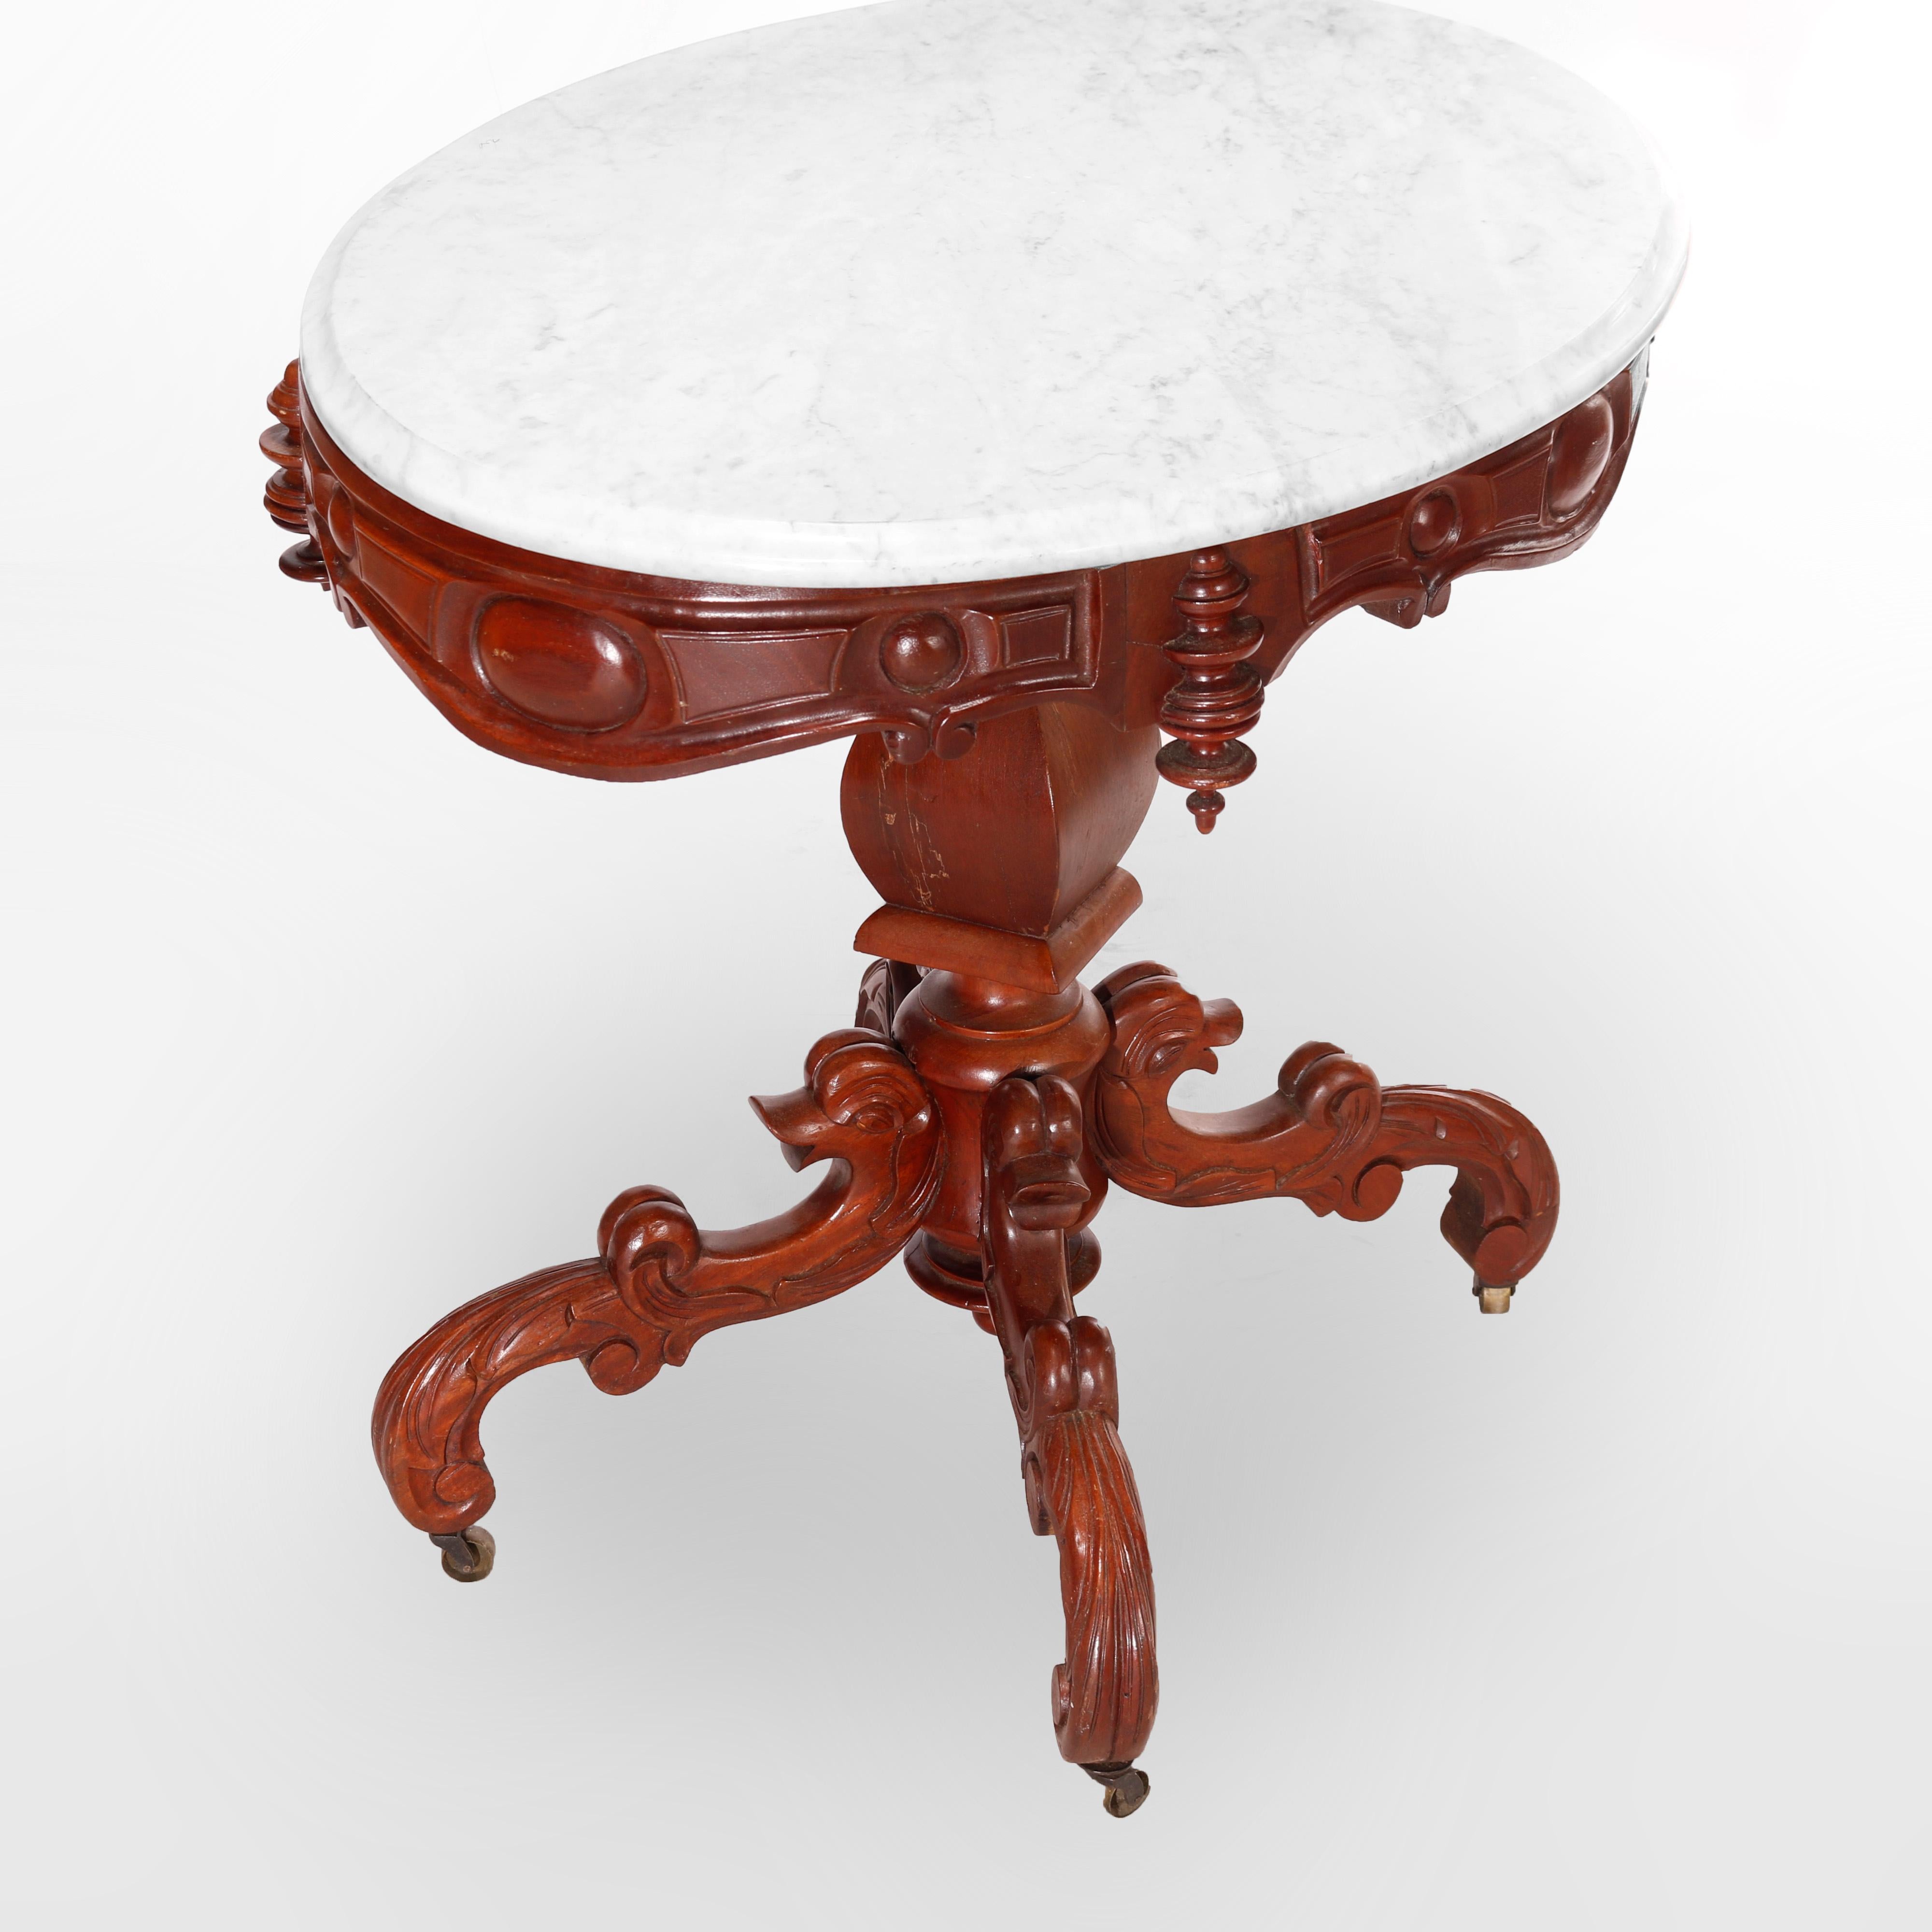 19th Century Antique Renaissance Revival Figural Carved Oval Marble Top Parlor Table, c1880 For Sale